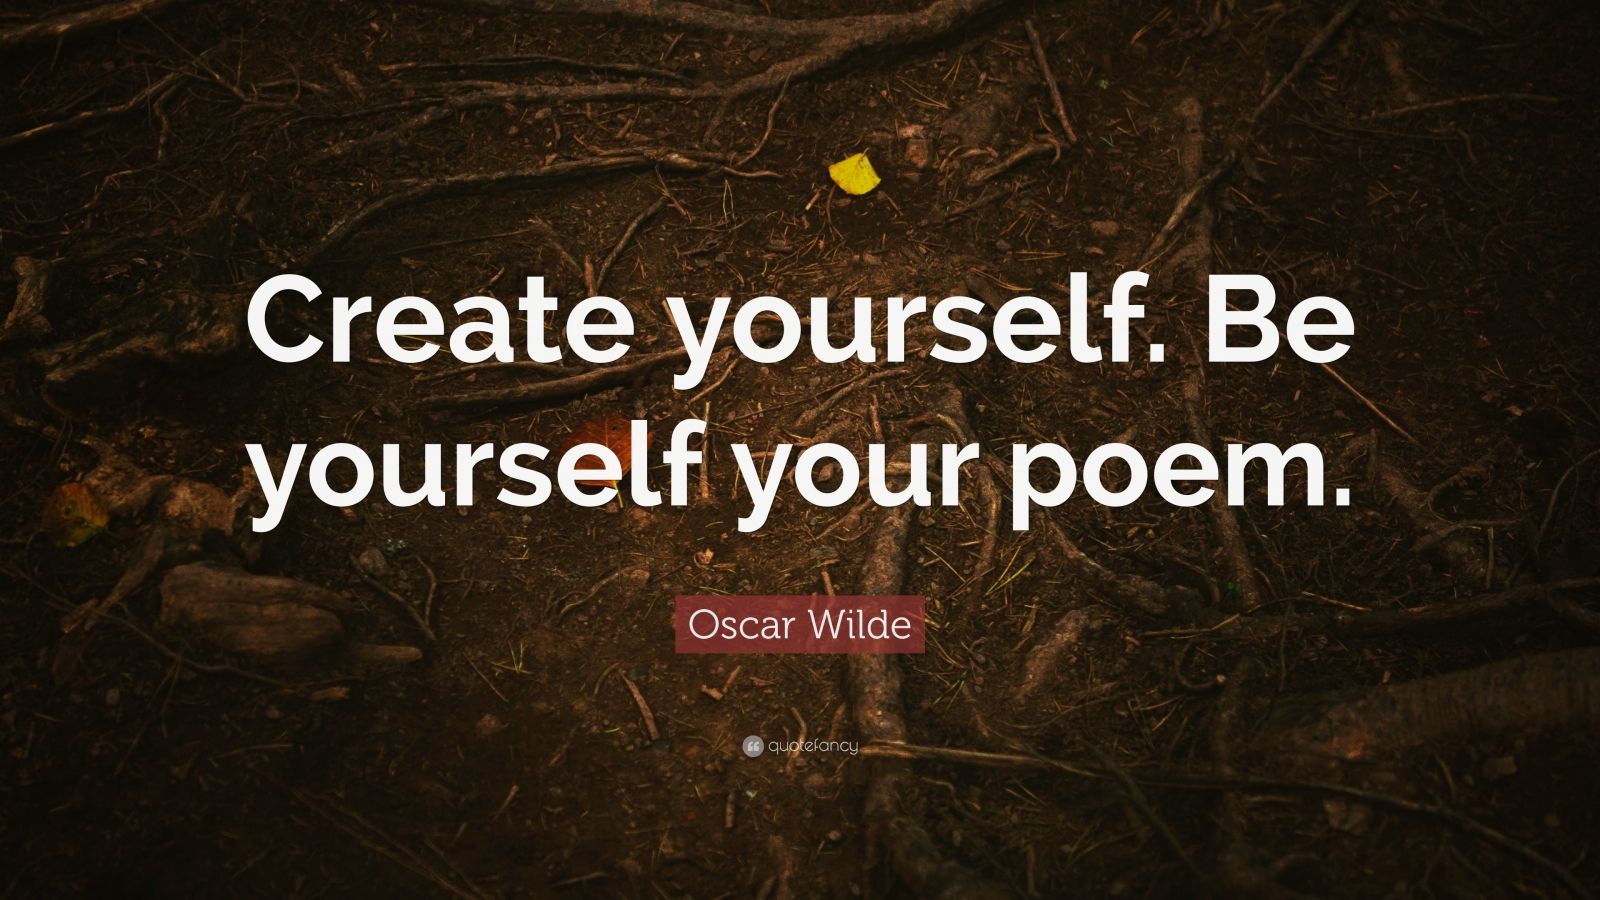 oscar wilde quotes be yourself